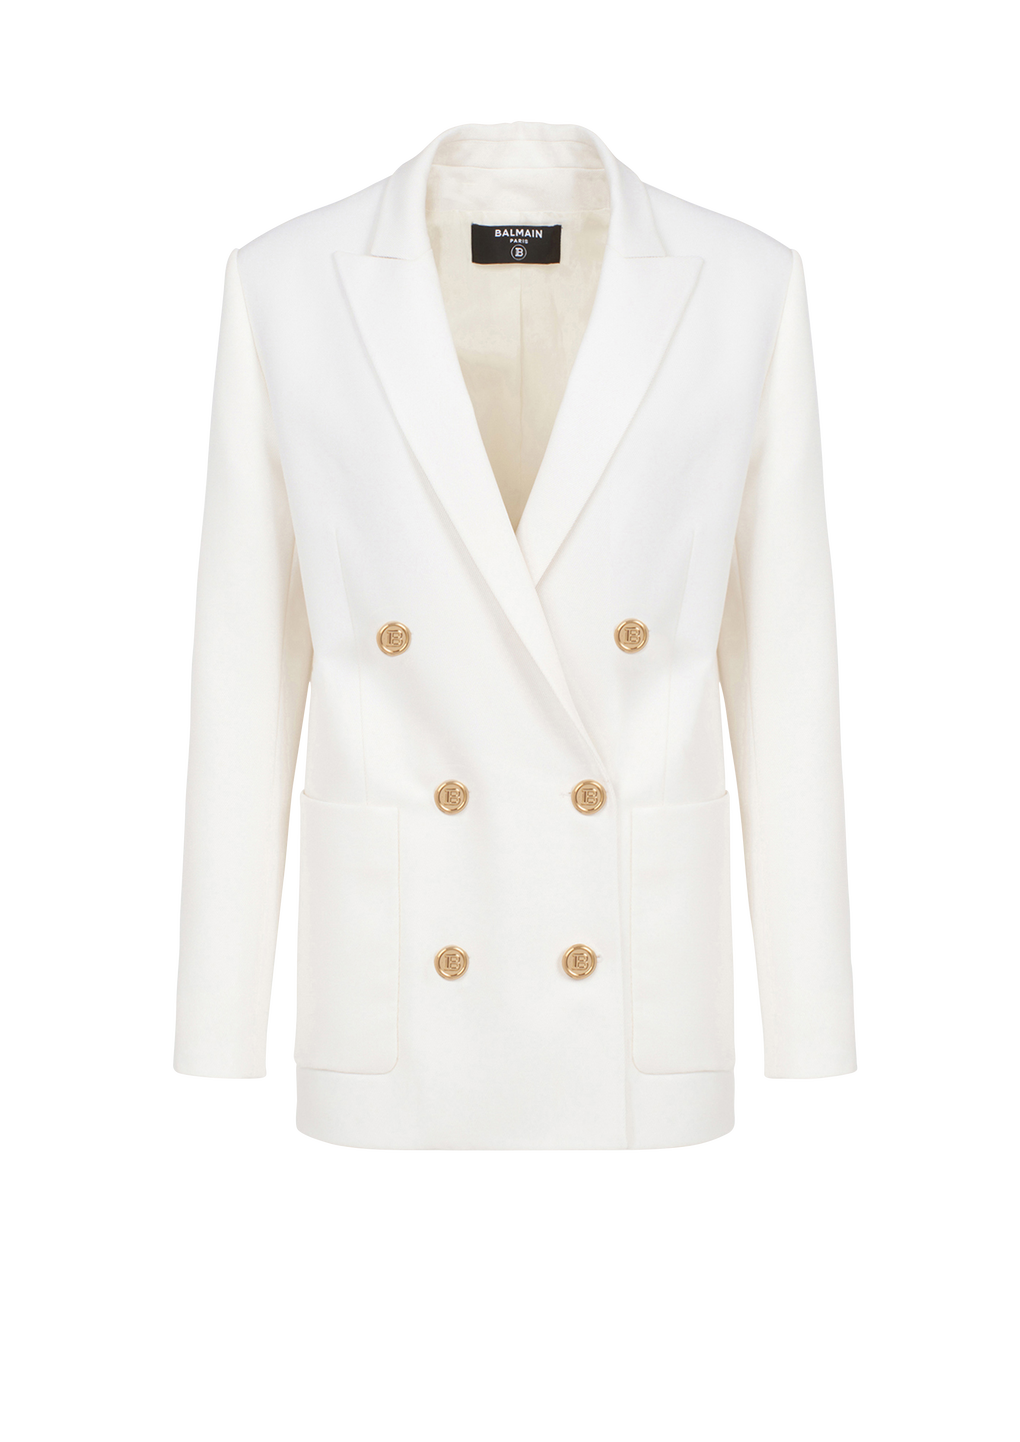 Wool double-breasted boyfriend jacket , white, hi-res